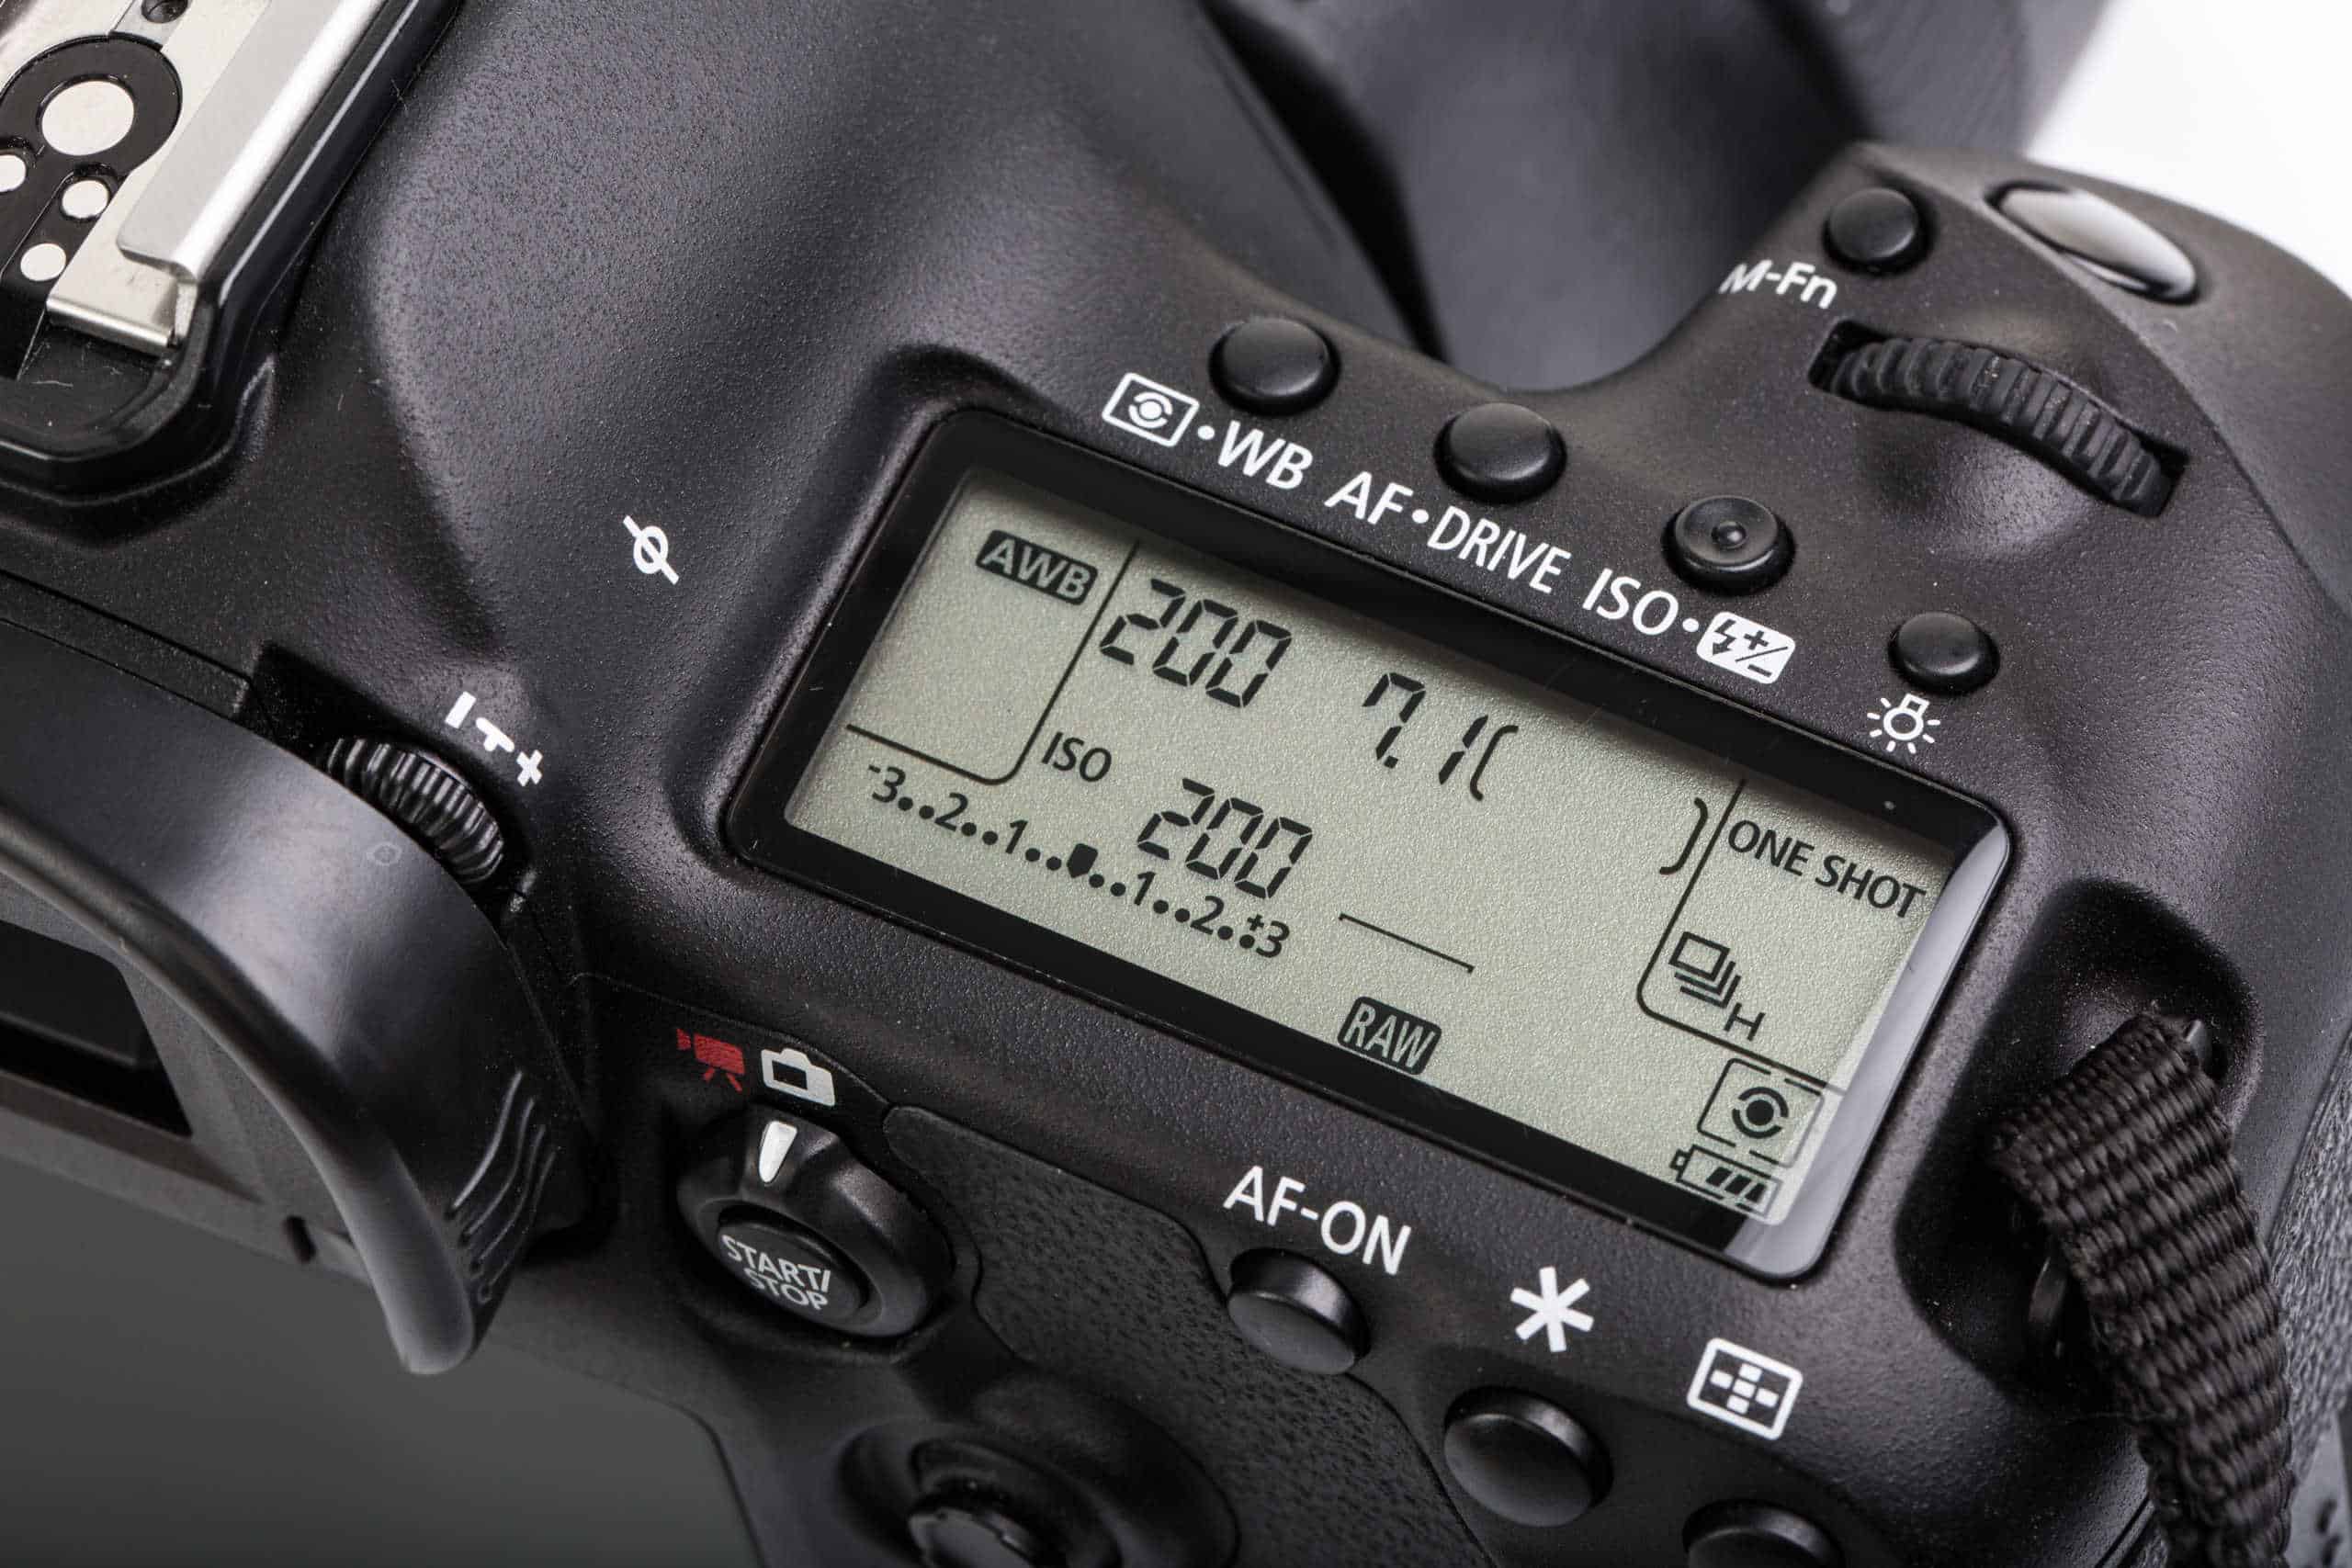 What Iso Range Should I Look Out For As I Buy A DSLR Camera